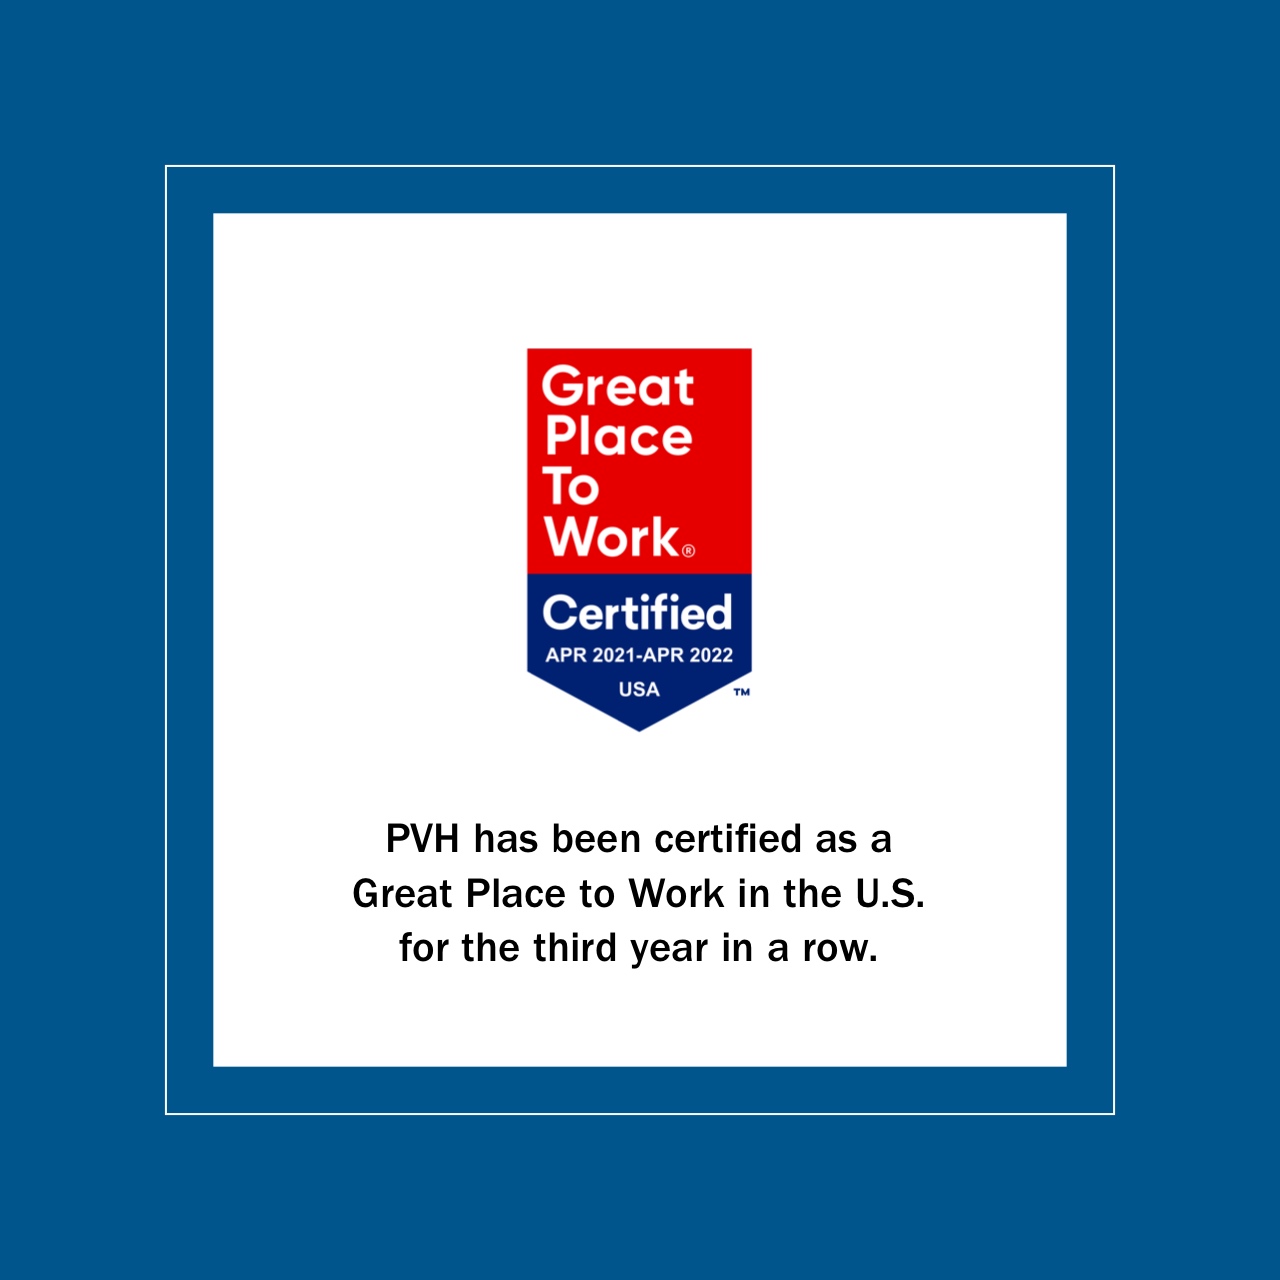 PVH Corp. Re-Certified as a Great Place To Work® for Third Year in a Row